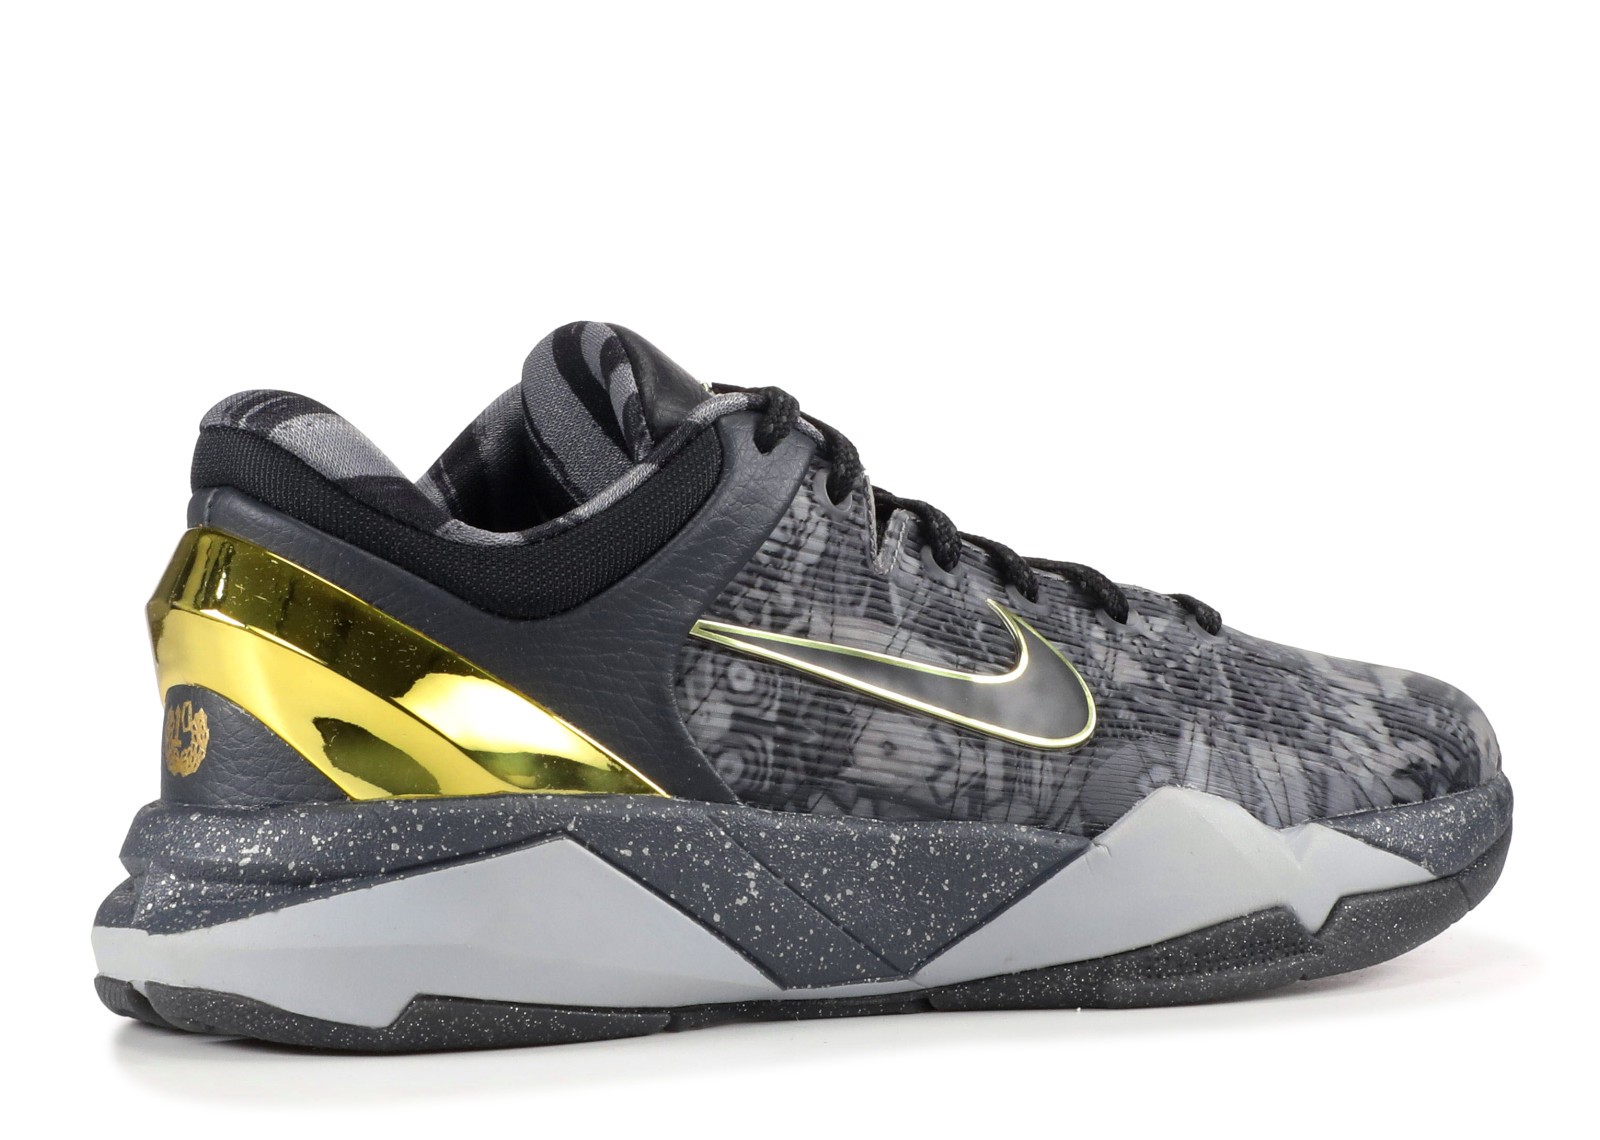 cold-cod205: black panther kobe shoes